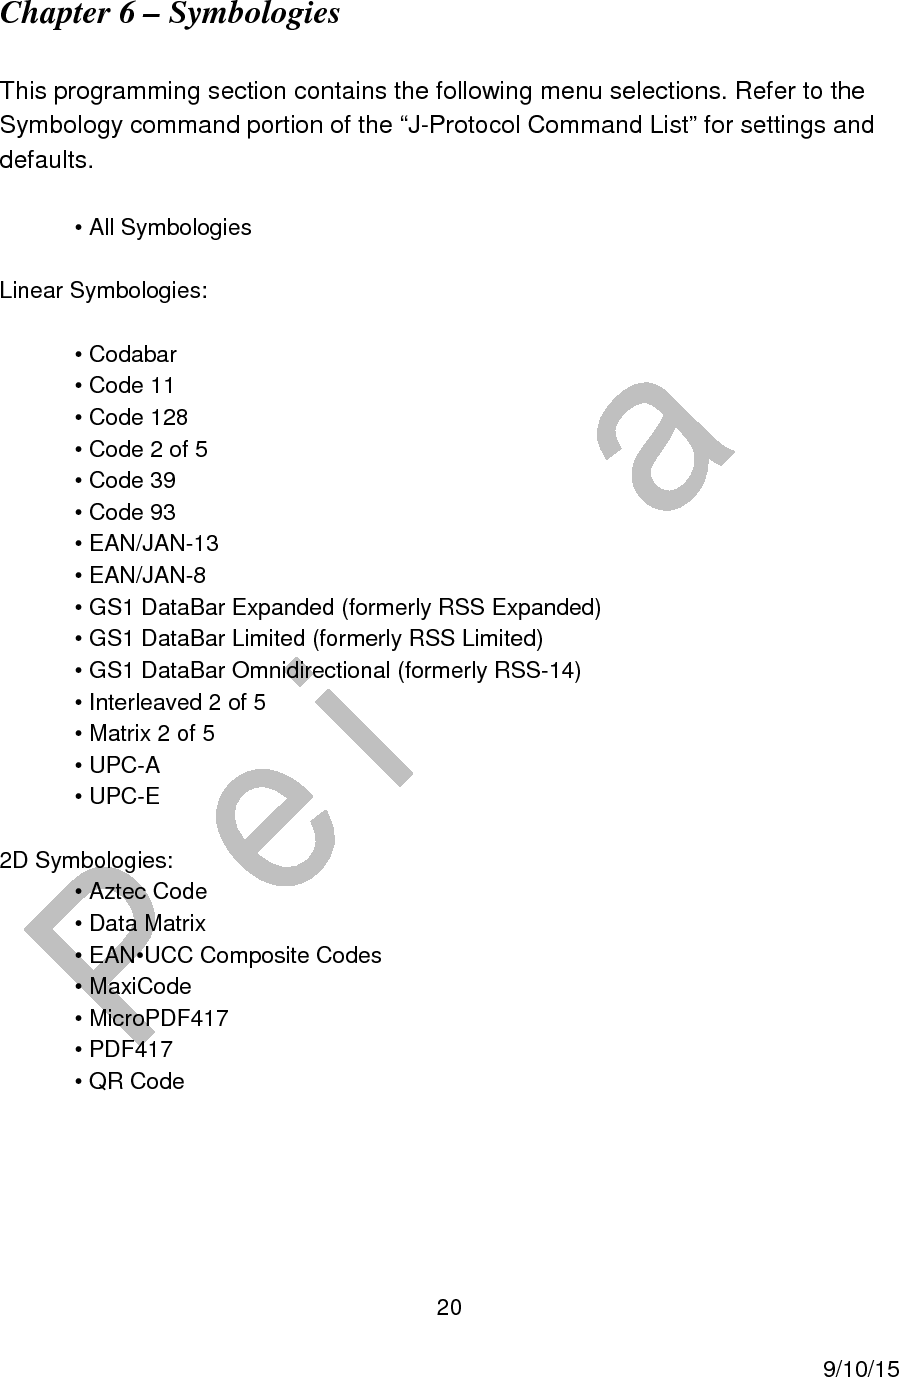  20     9/10/15 Chapter 6 – Symbologies   This programming section contains the following menu selections. Refer to the Symbology command portion of the “J-Protocol Command List” for settings and defaults.  • All Symbologies  Linear Symbologies:  • Codabar • Code 11 • Code 128 • Code 2 of 5 • Code 39 • Code 93 • EAN/JAN-13 • EAN/JAN-8 • GS1 DataBar Expanded (formerly RSS Expanded) • GS1 DataBar Limited (formerly RSS Limited) • GS1 DataBar Omnidirectional (formerly RSS-14) • Interleaved 2 of 5 • Matrix 2 of 5 • UPC-A • UPC-E  2D Symbologies: • Aztec Code • Data Matrix • EAN•UCC Composite Codes • MaxiCode • MicroPDF417 • PDF417 • QR Code    